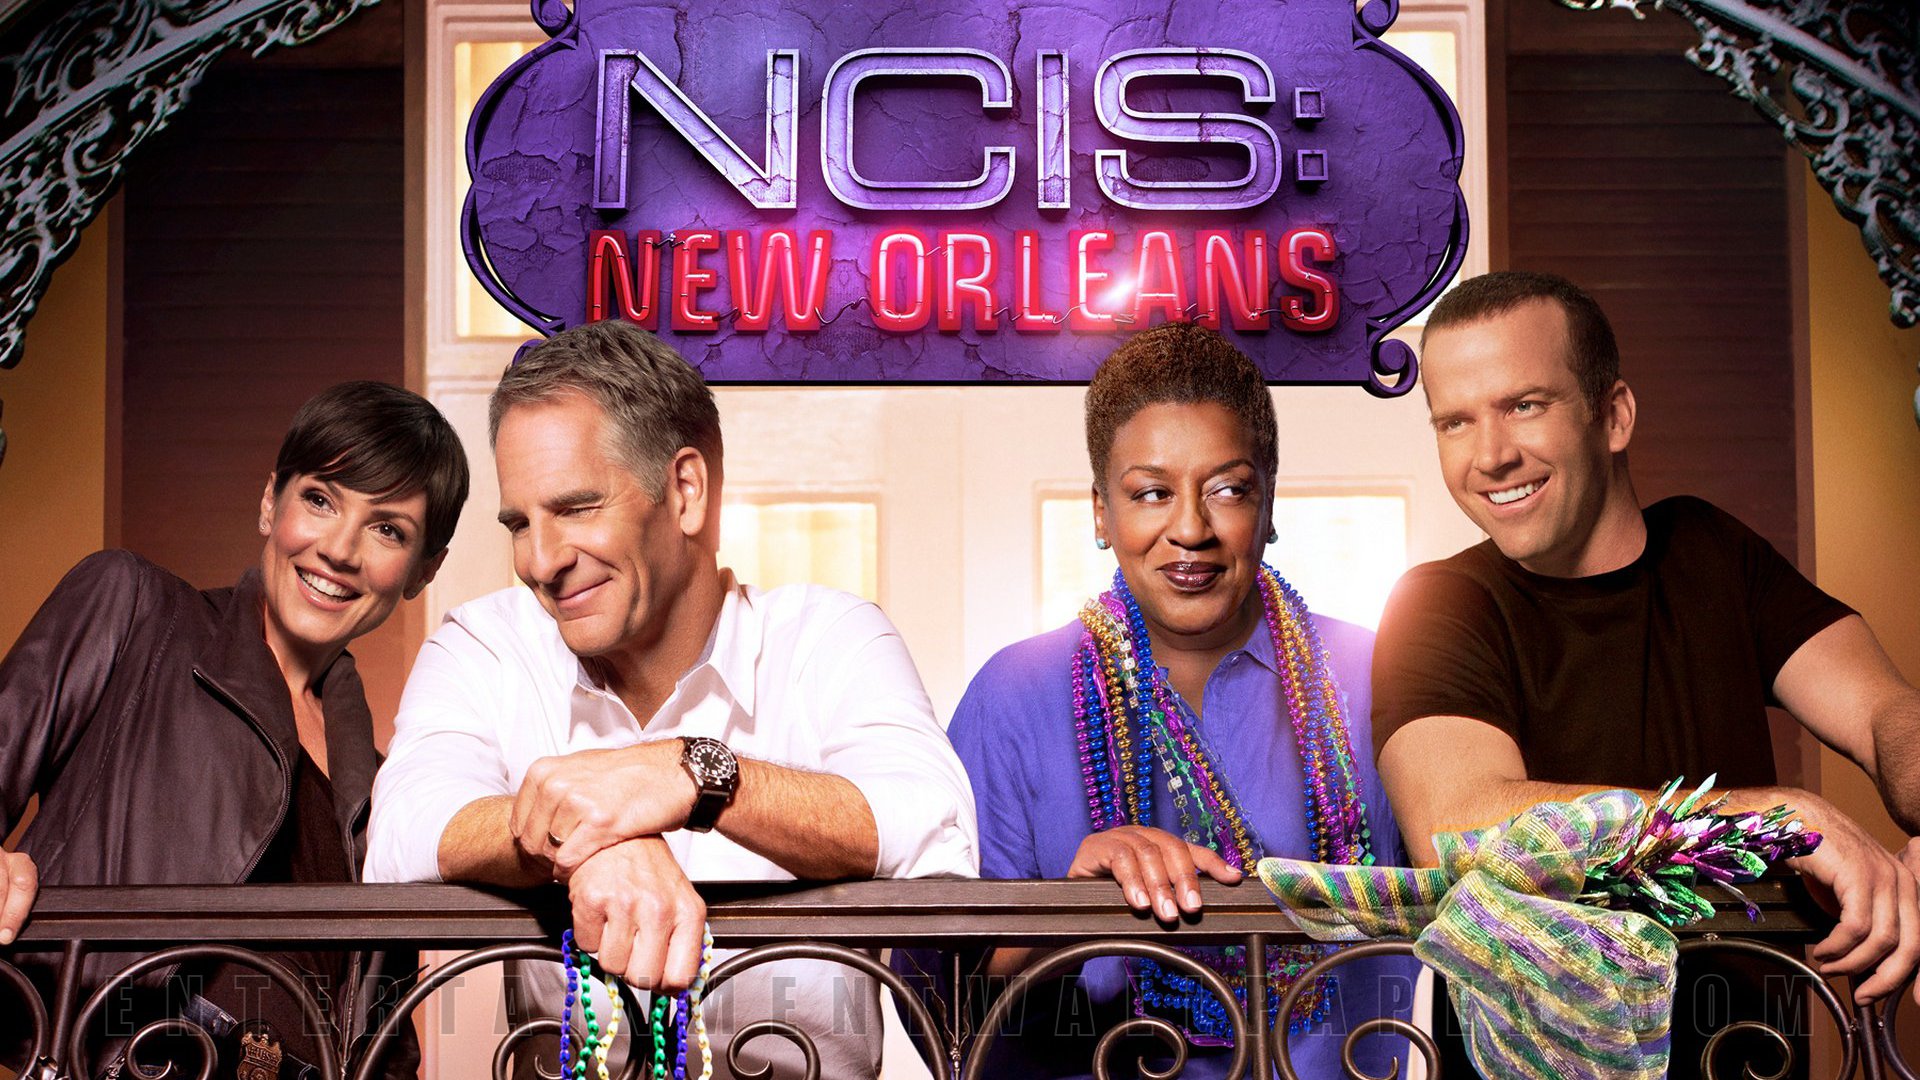 NCIS: New Orleans Wallpaper: New Orleans Wallpaper